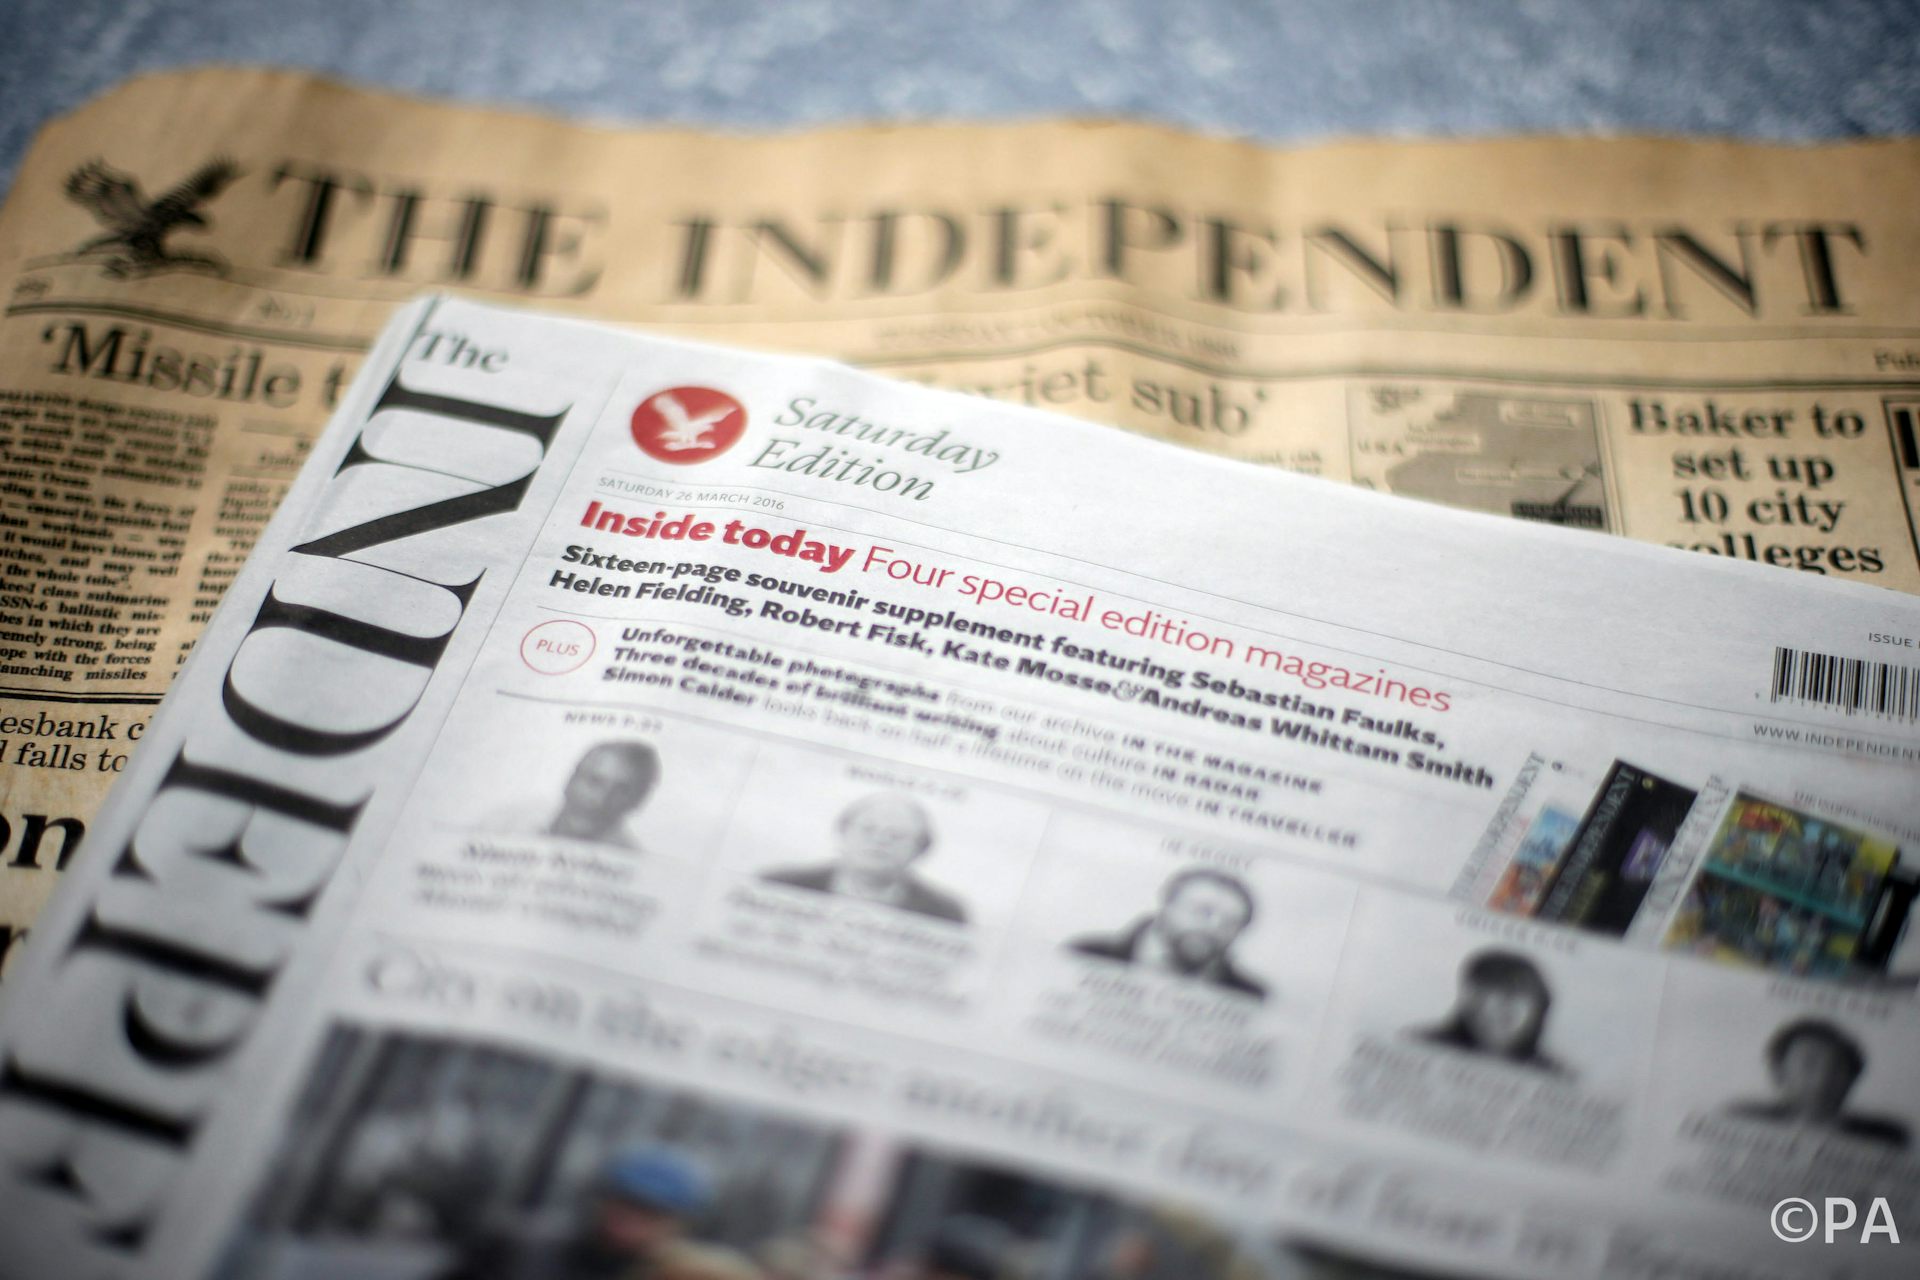 final print edition of the independent